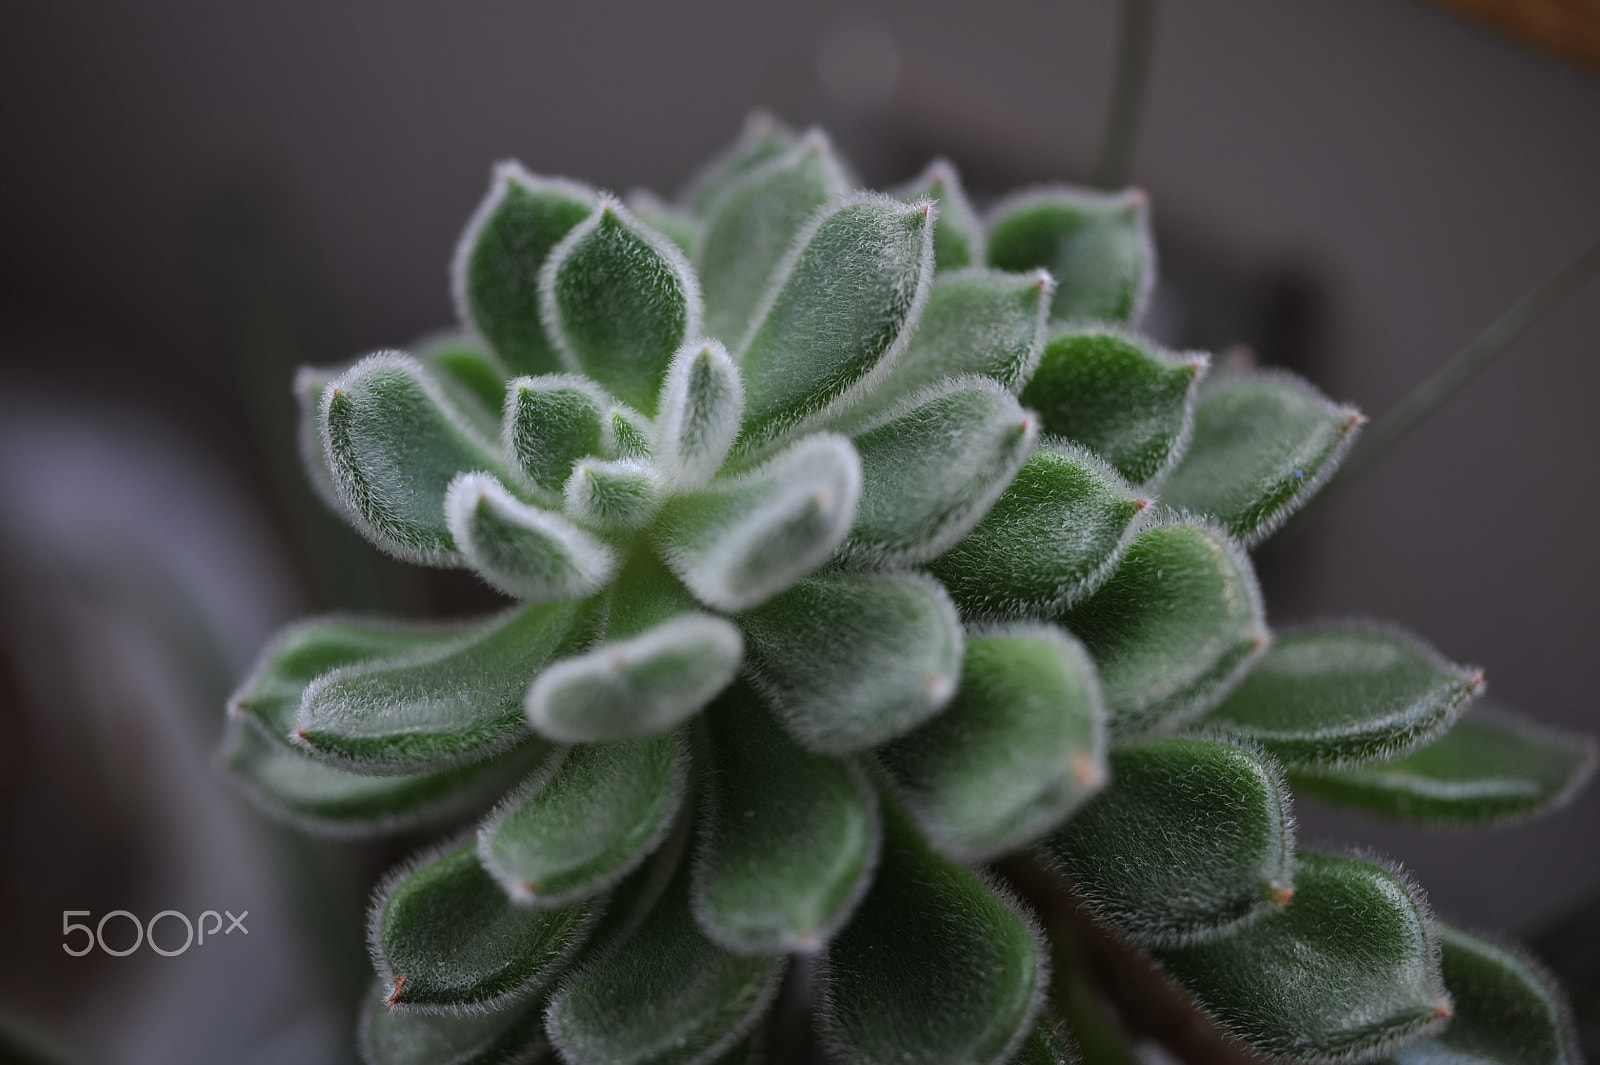 AF Micro-Nikkor 55mm f/2.8 sample photo. Fuzzy succulents photography